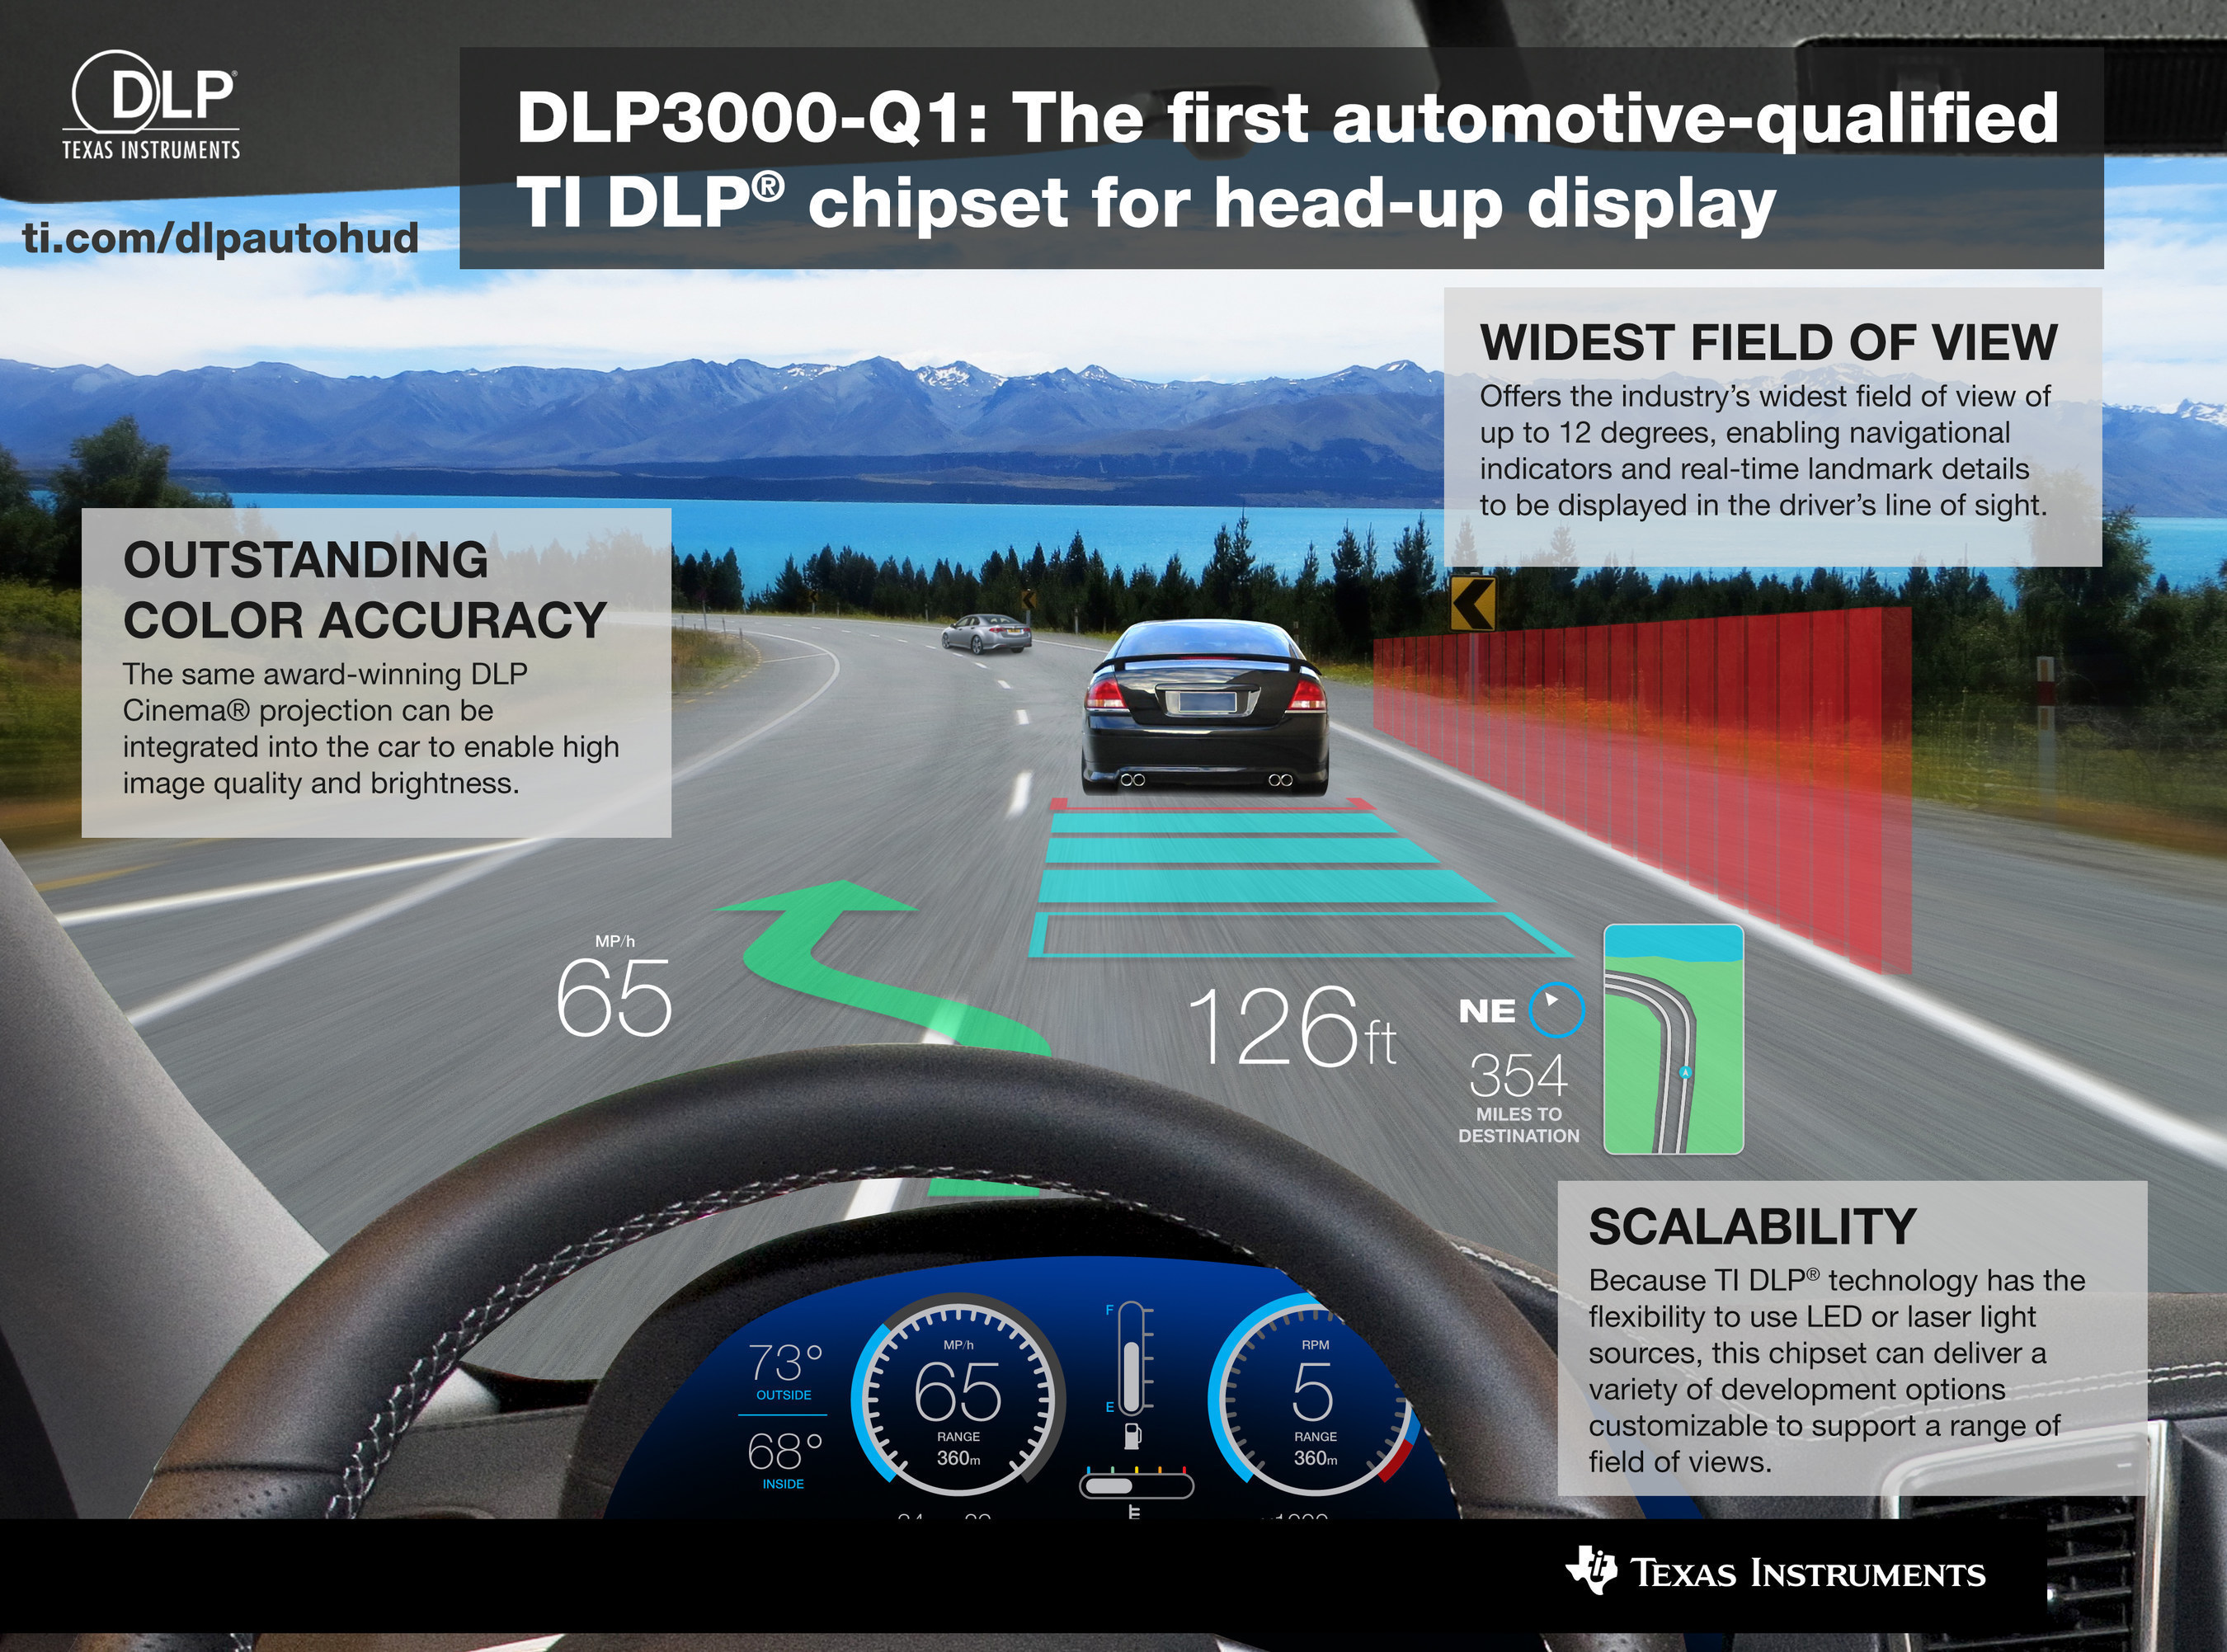 DLP3000-Q1: The first automotive-qualified TI DLP chipset for head-up display